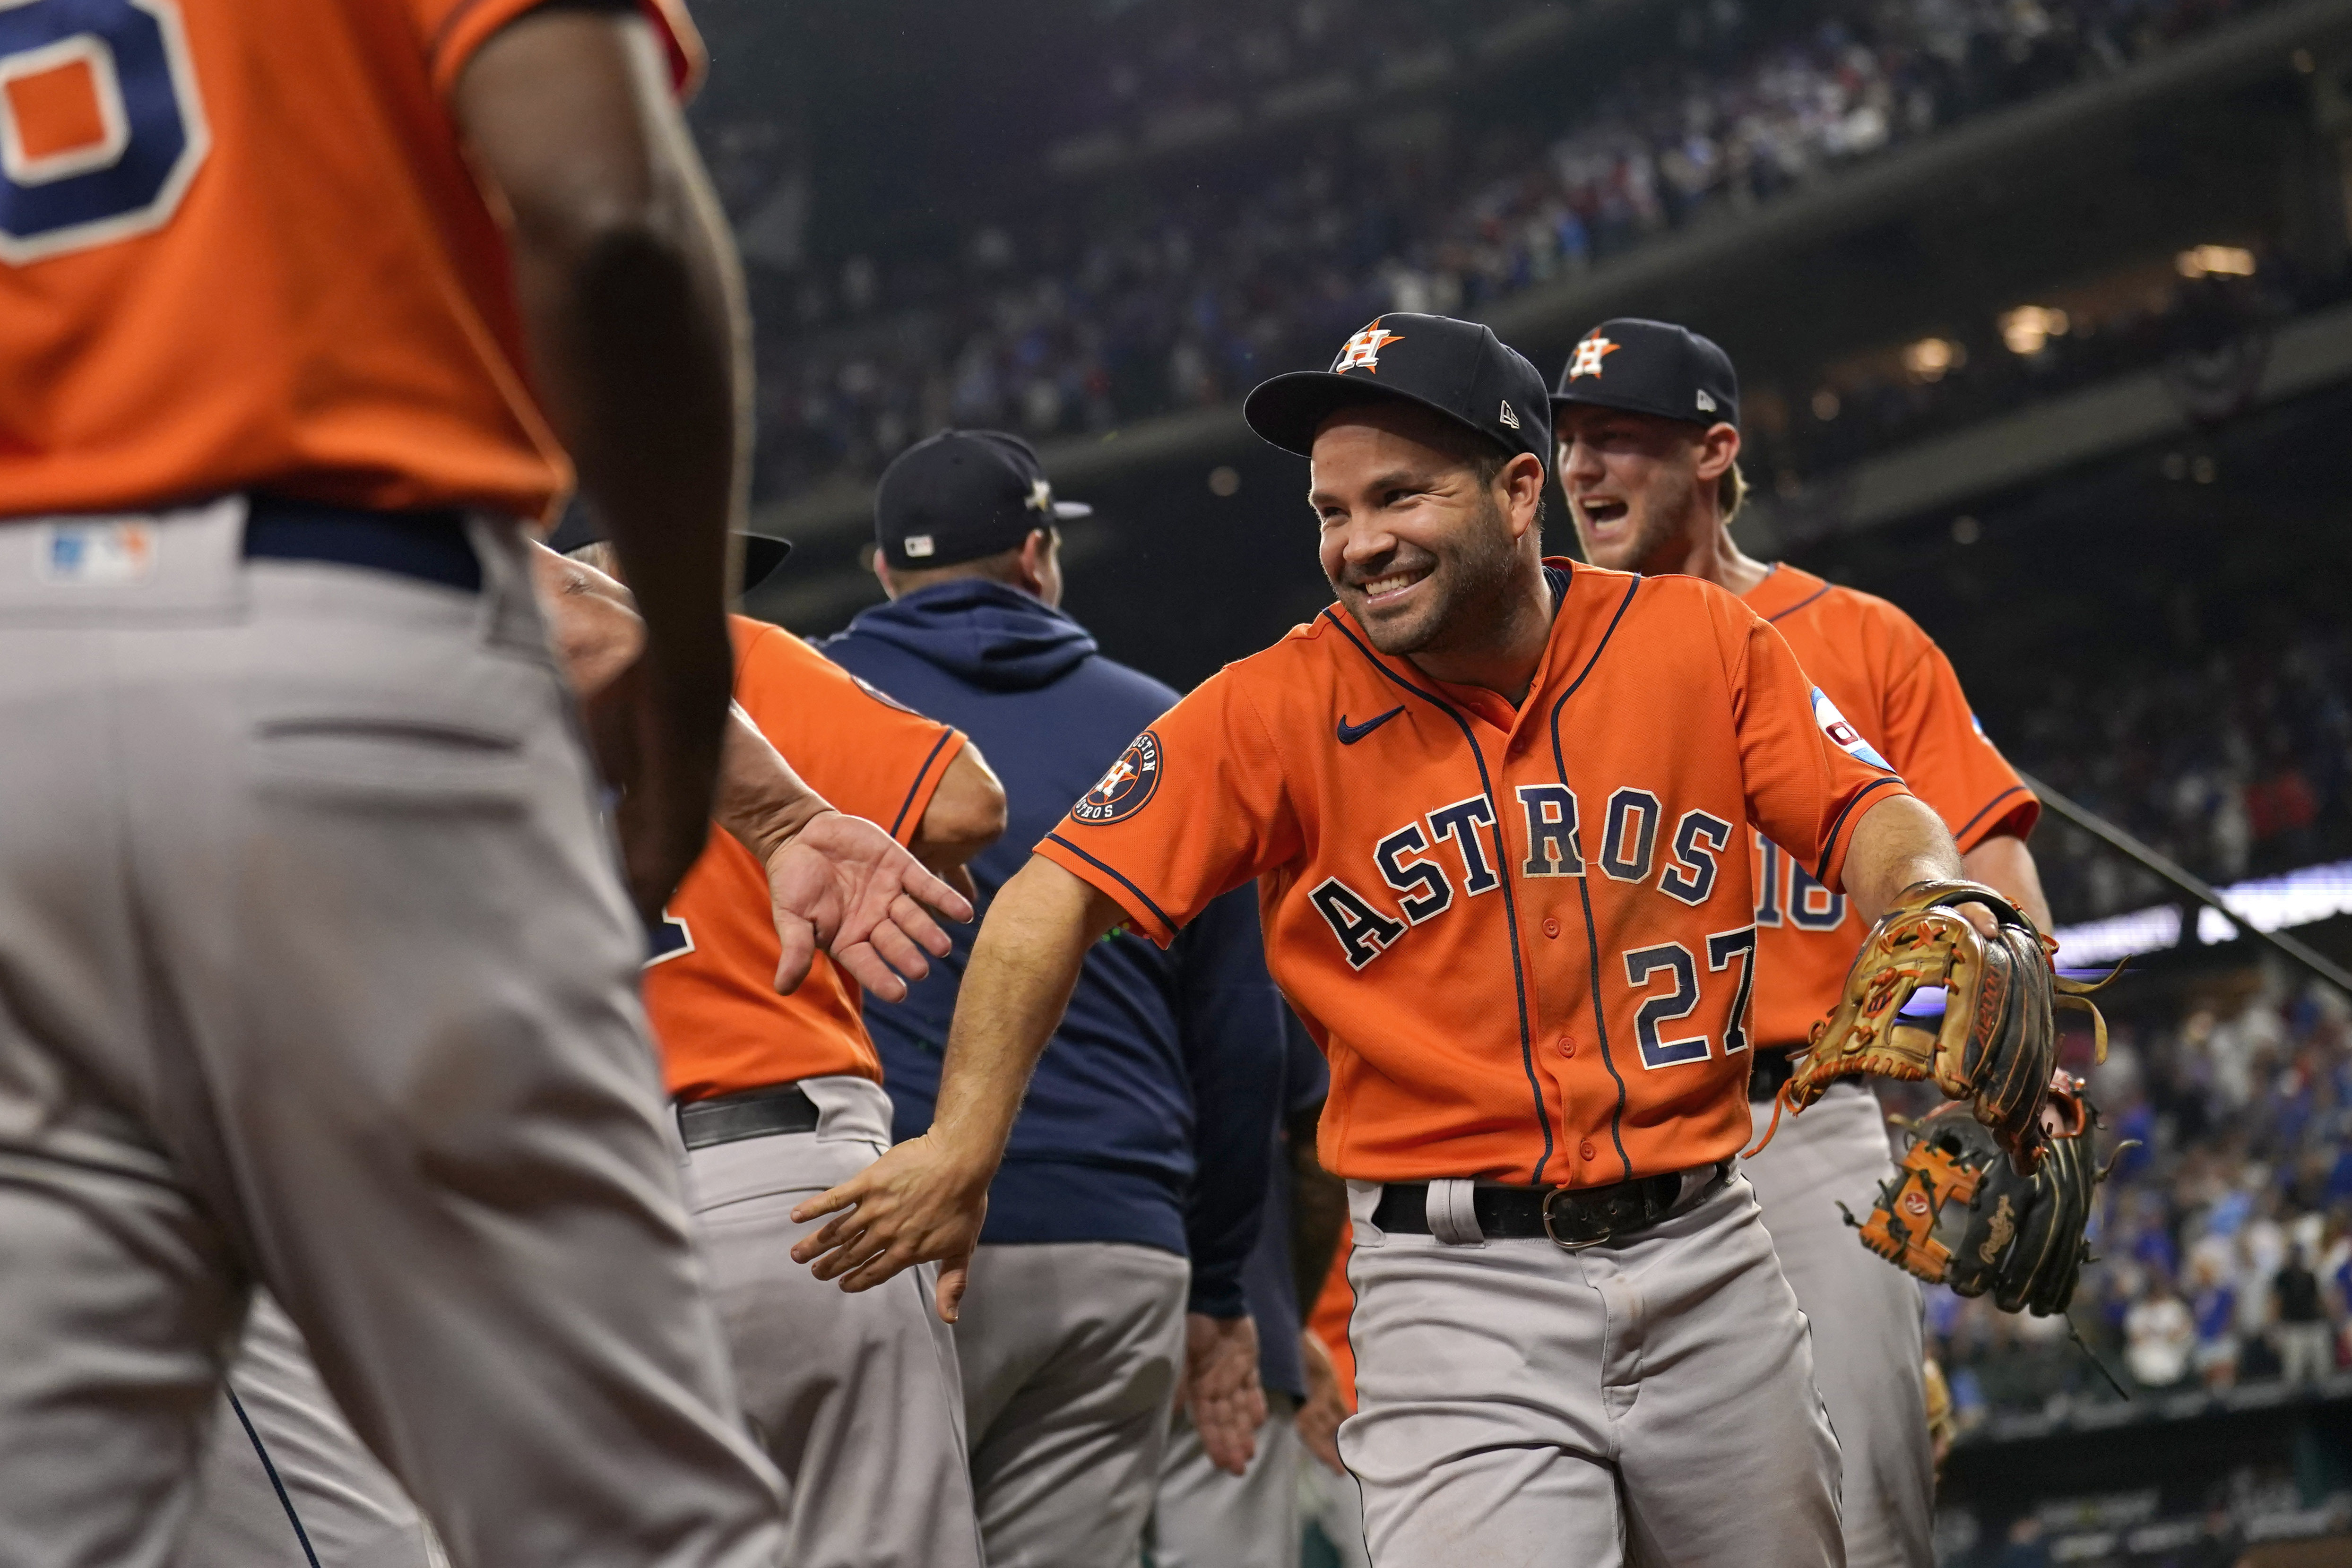 Framber Valdez sets Astros record with 21 straight quality starts - AS USA